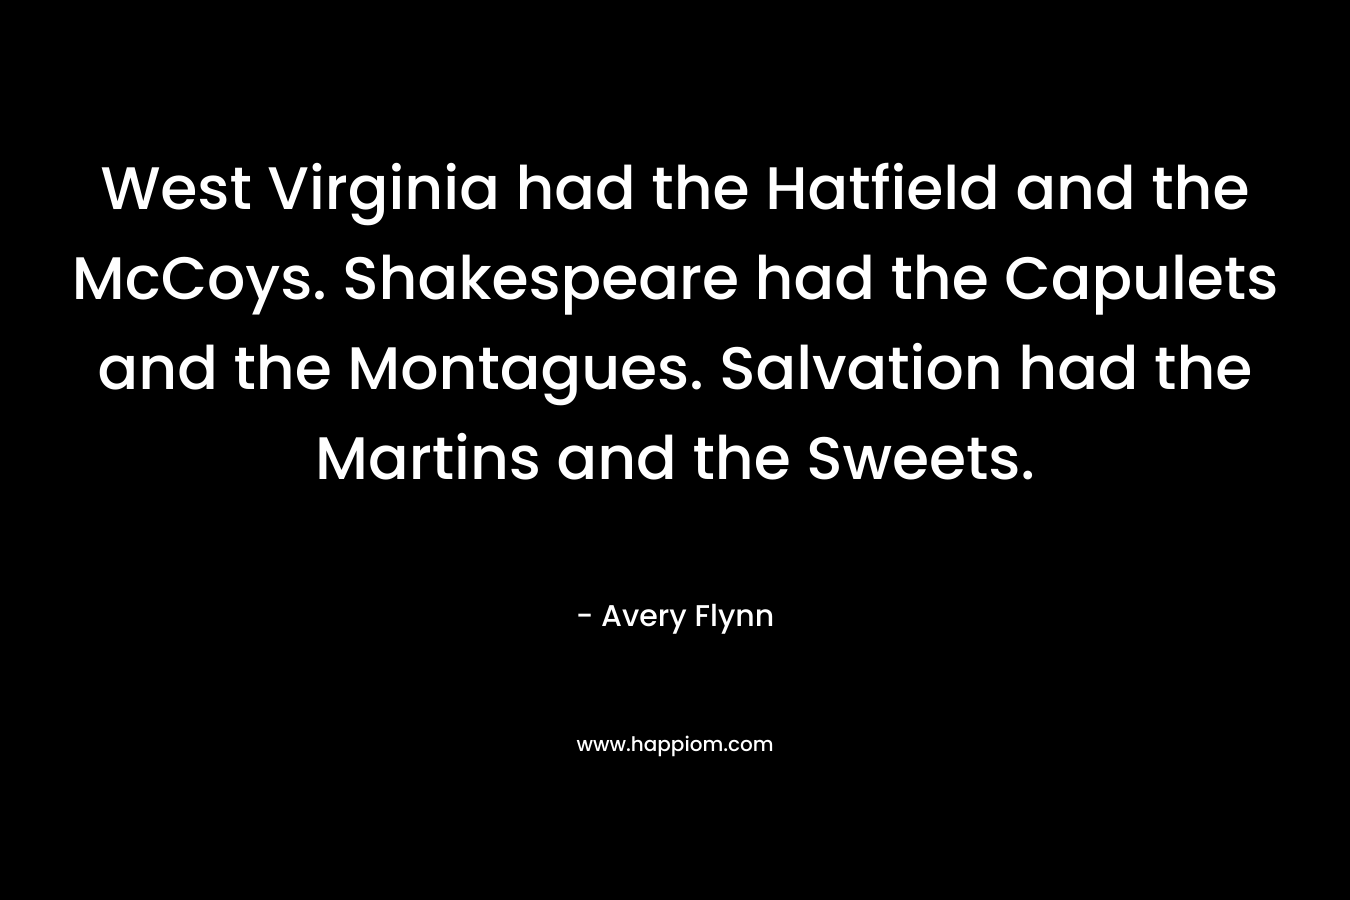 West Virginia had the Hatfield and the McCoys. Shakespeare had the Capulets and the Montagues. Salvation had the Martins and the Sweets. – Avery Flynn